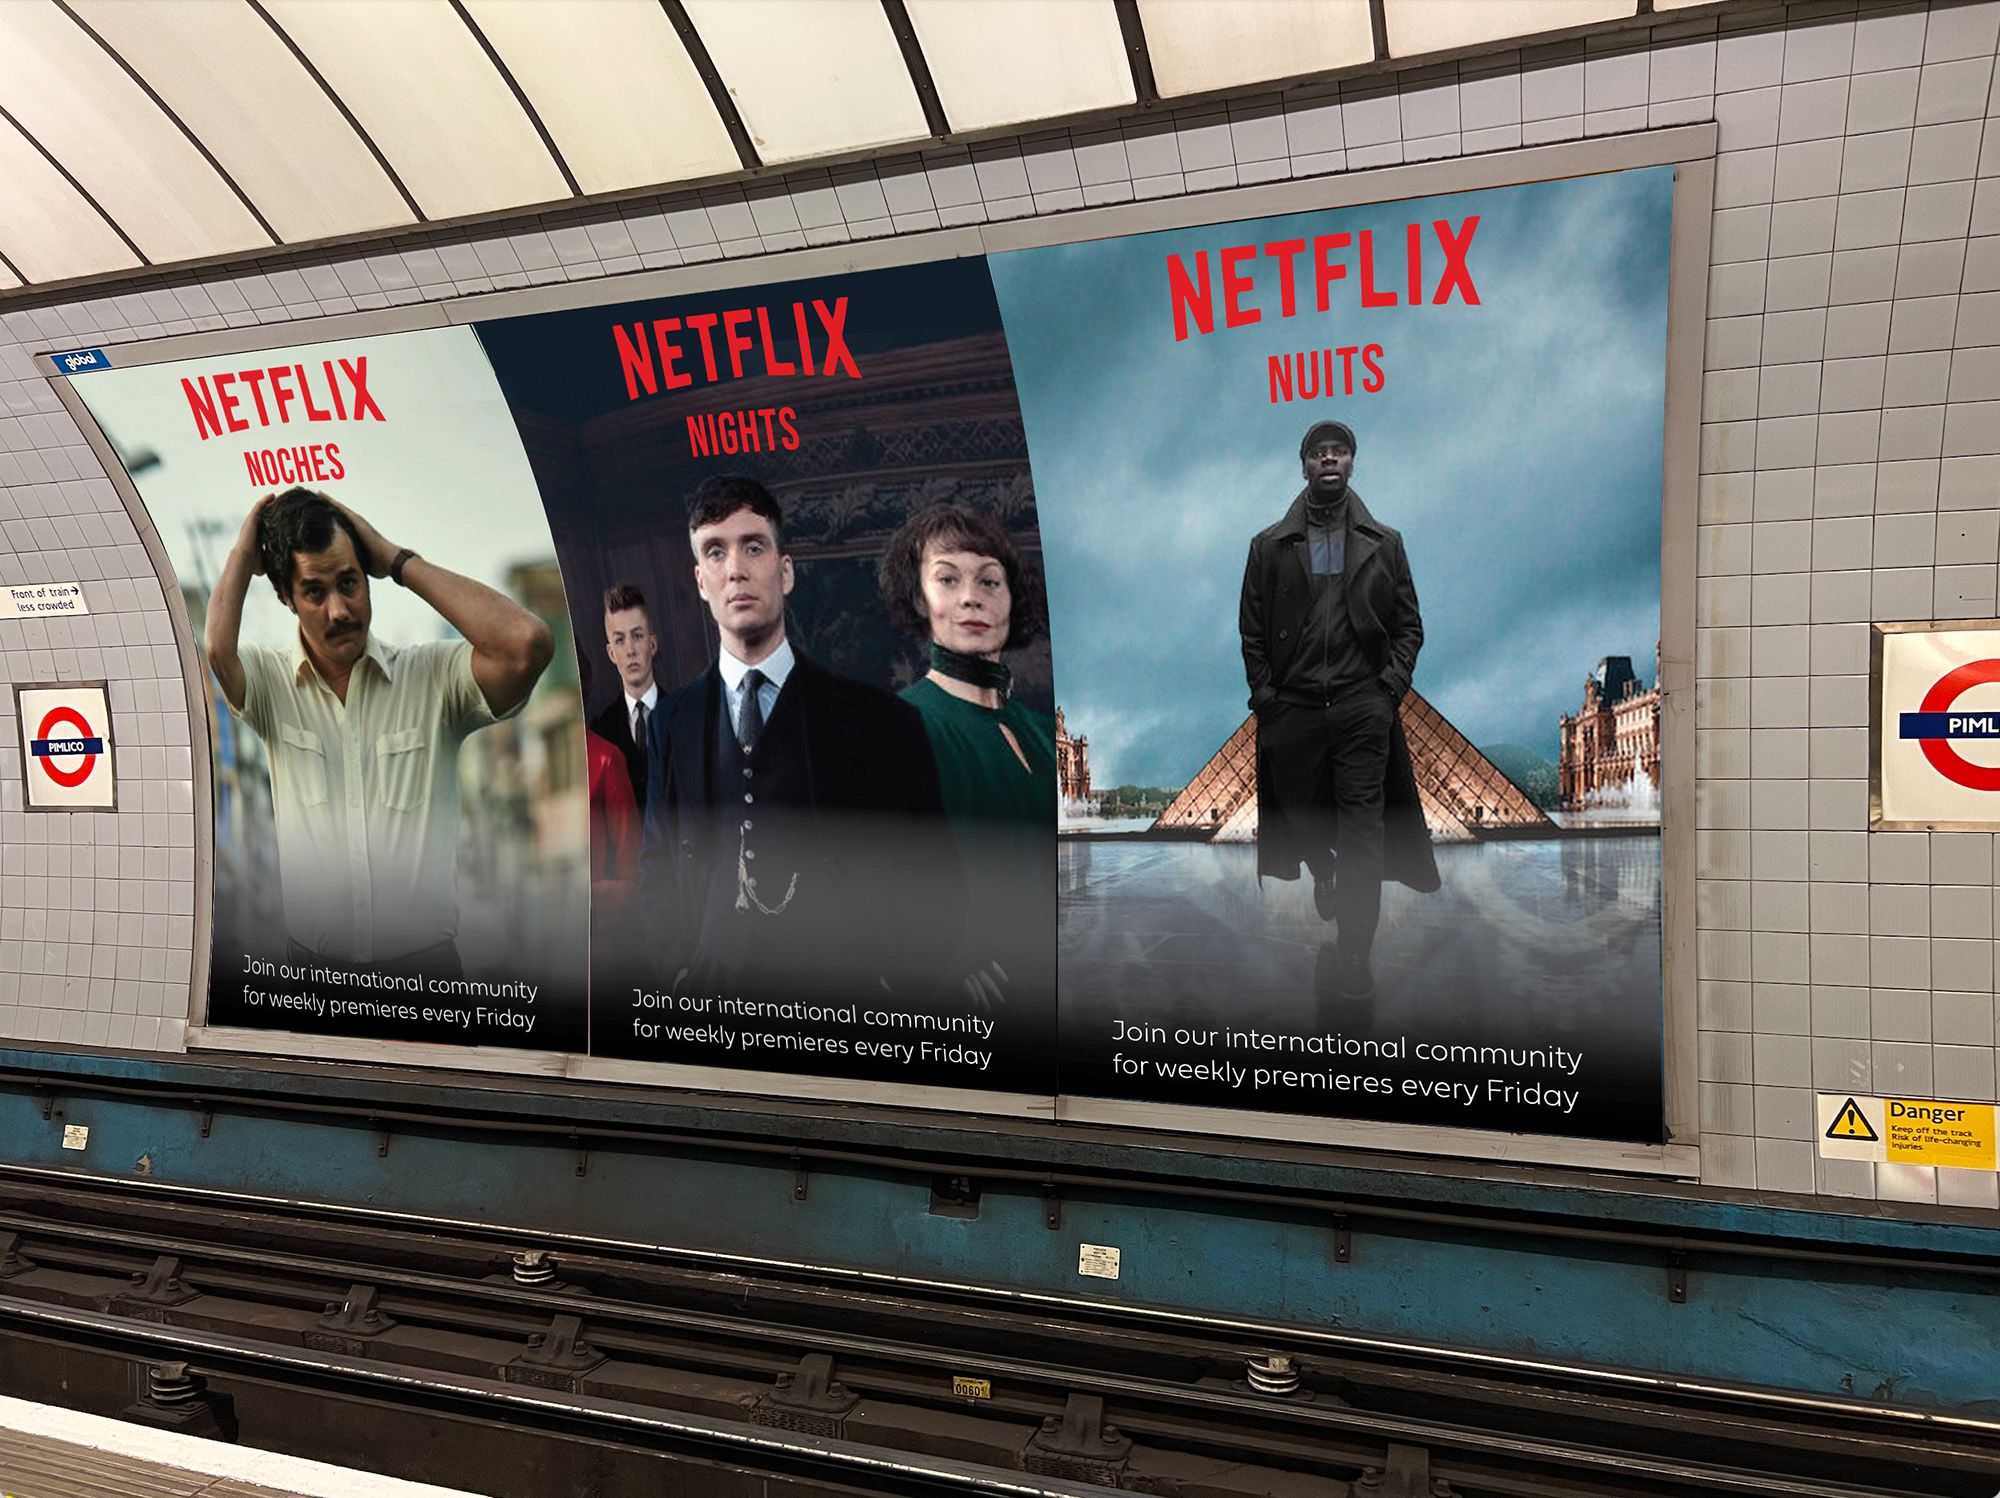 Three large posters with the word NETFLIX and images of actors underneath are on a poster wall in Pimlico tube station. Underneath each word ‘NETFLIX’ the first poster has ‘NOCHES’, the second ‘NIGHT’ and the third ‘NUITS’. At the bottom of the posters the text ‘Join our international community for weekly premieres every Friday’ is written. 